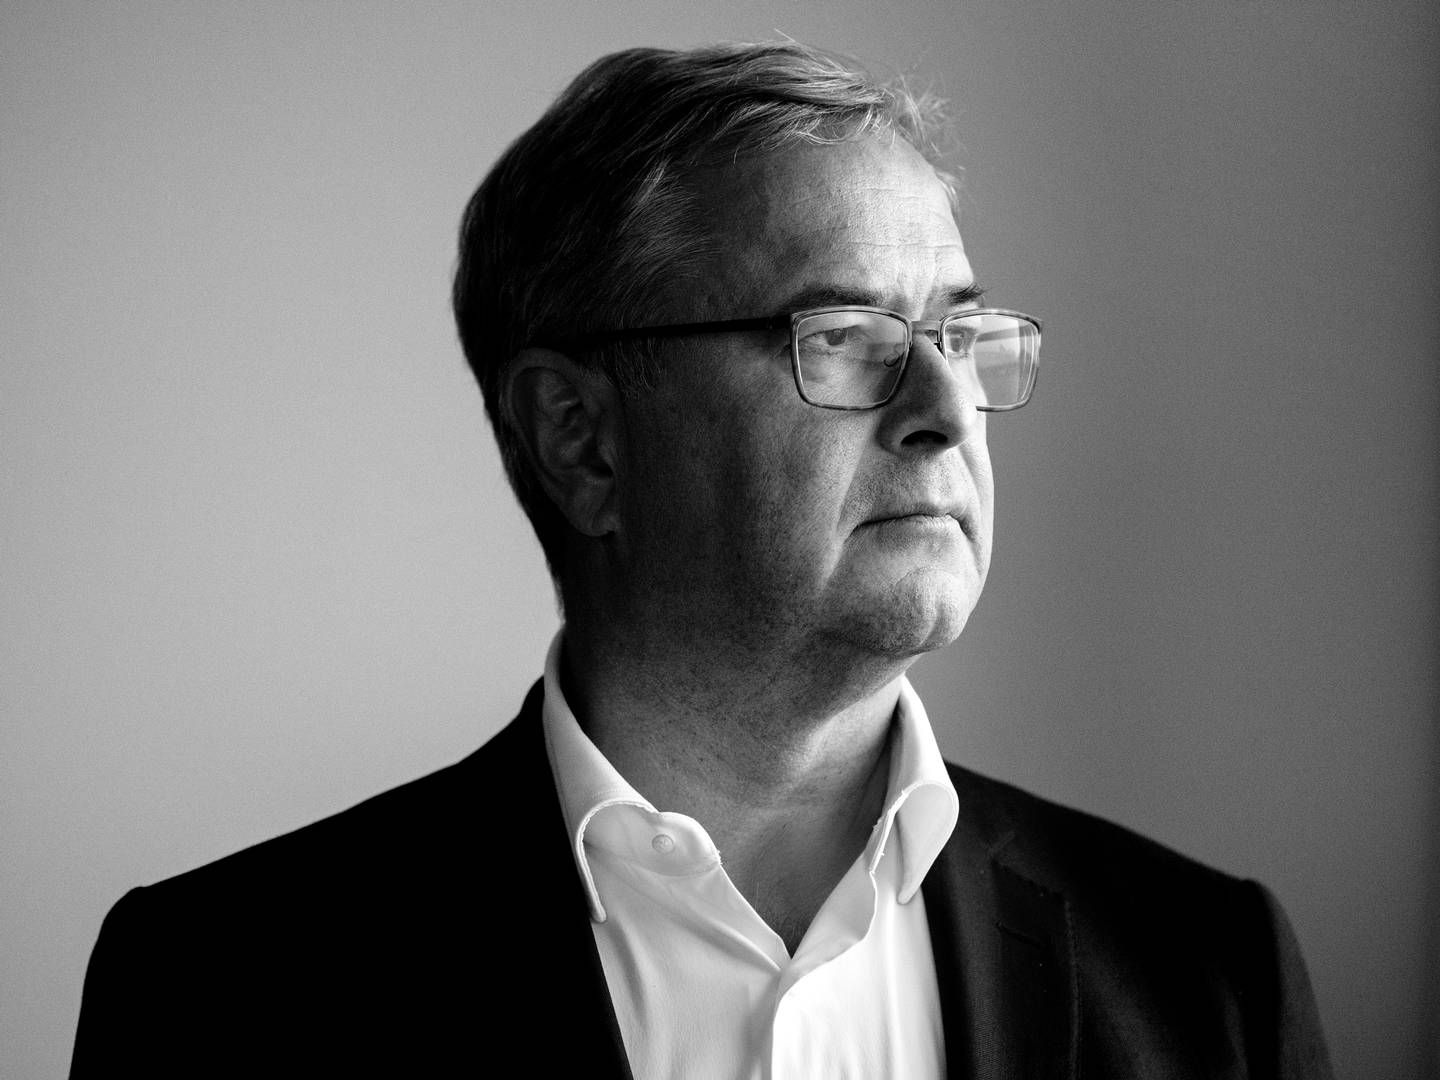 Søren Skou spent his entire career at Maersk, starting as a shipping trainee in 1983. He served as CEO from 2016 through 2022. | Photo: Nanna Navntoft/Politiken/Ritzau Scanpix